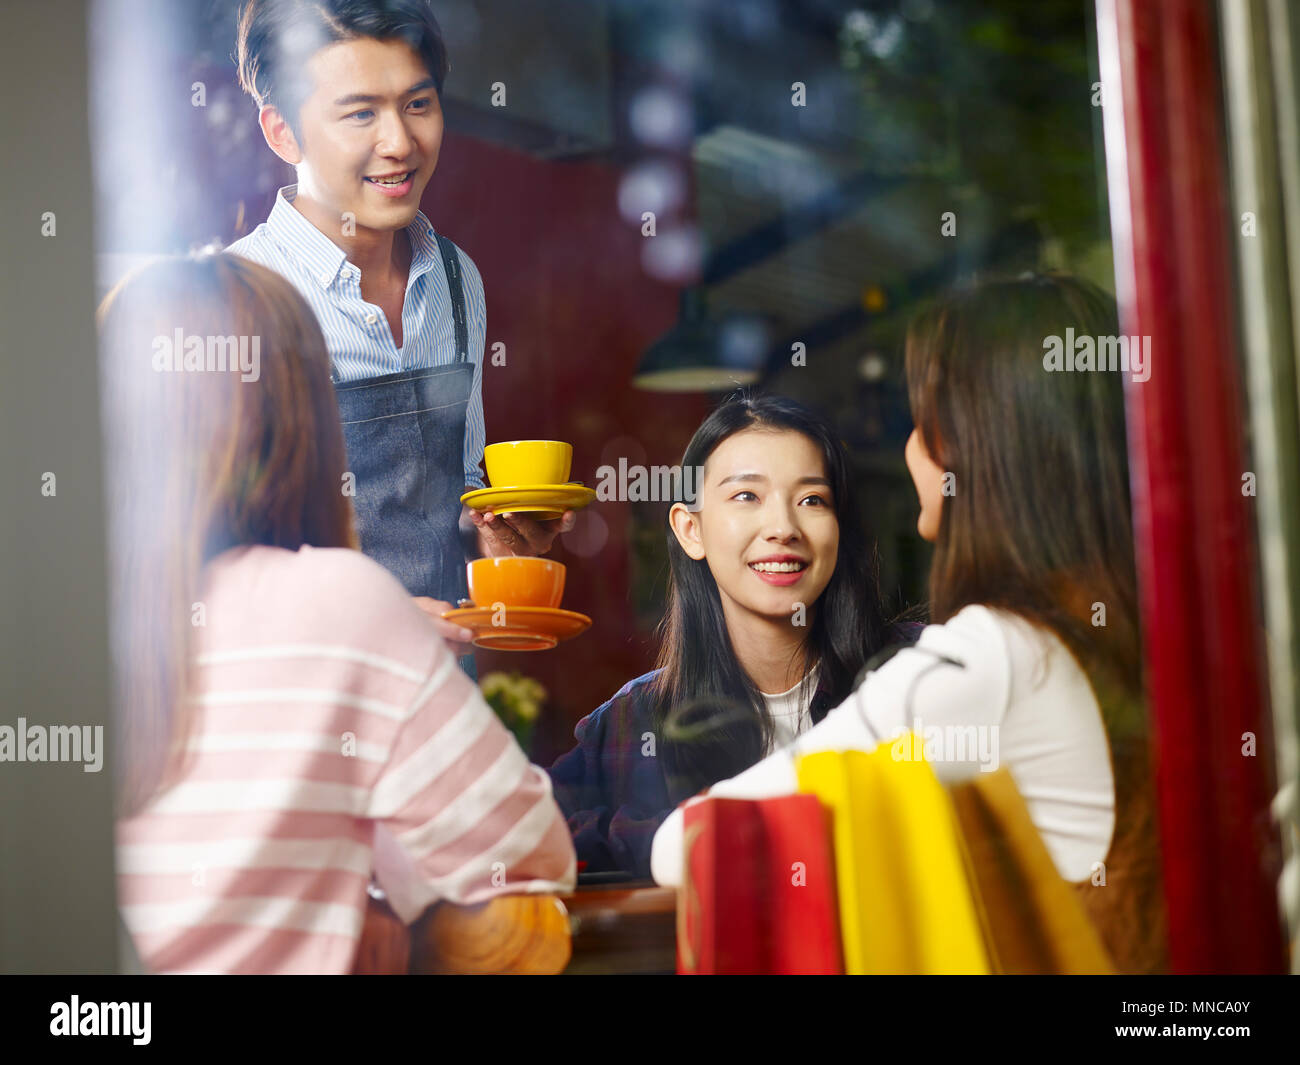 young asian waiter serving female customers in coffee shop, shot through window glass. Stock Photo